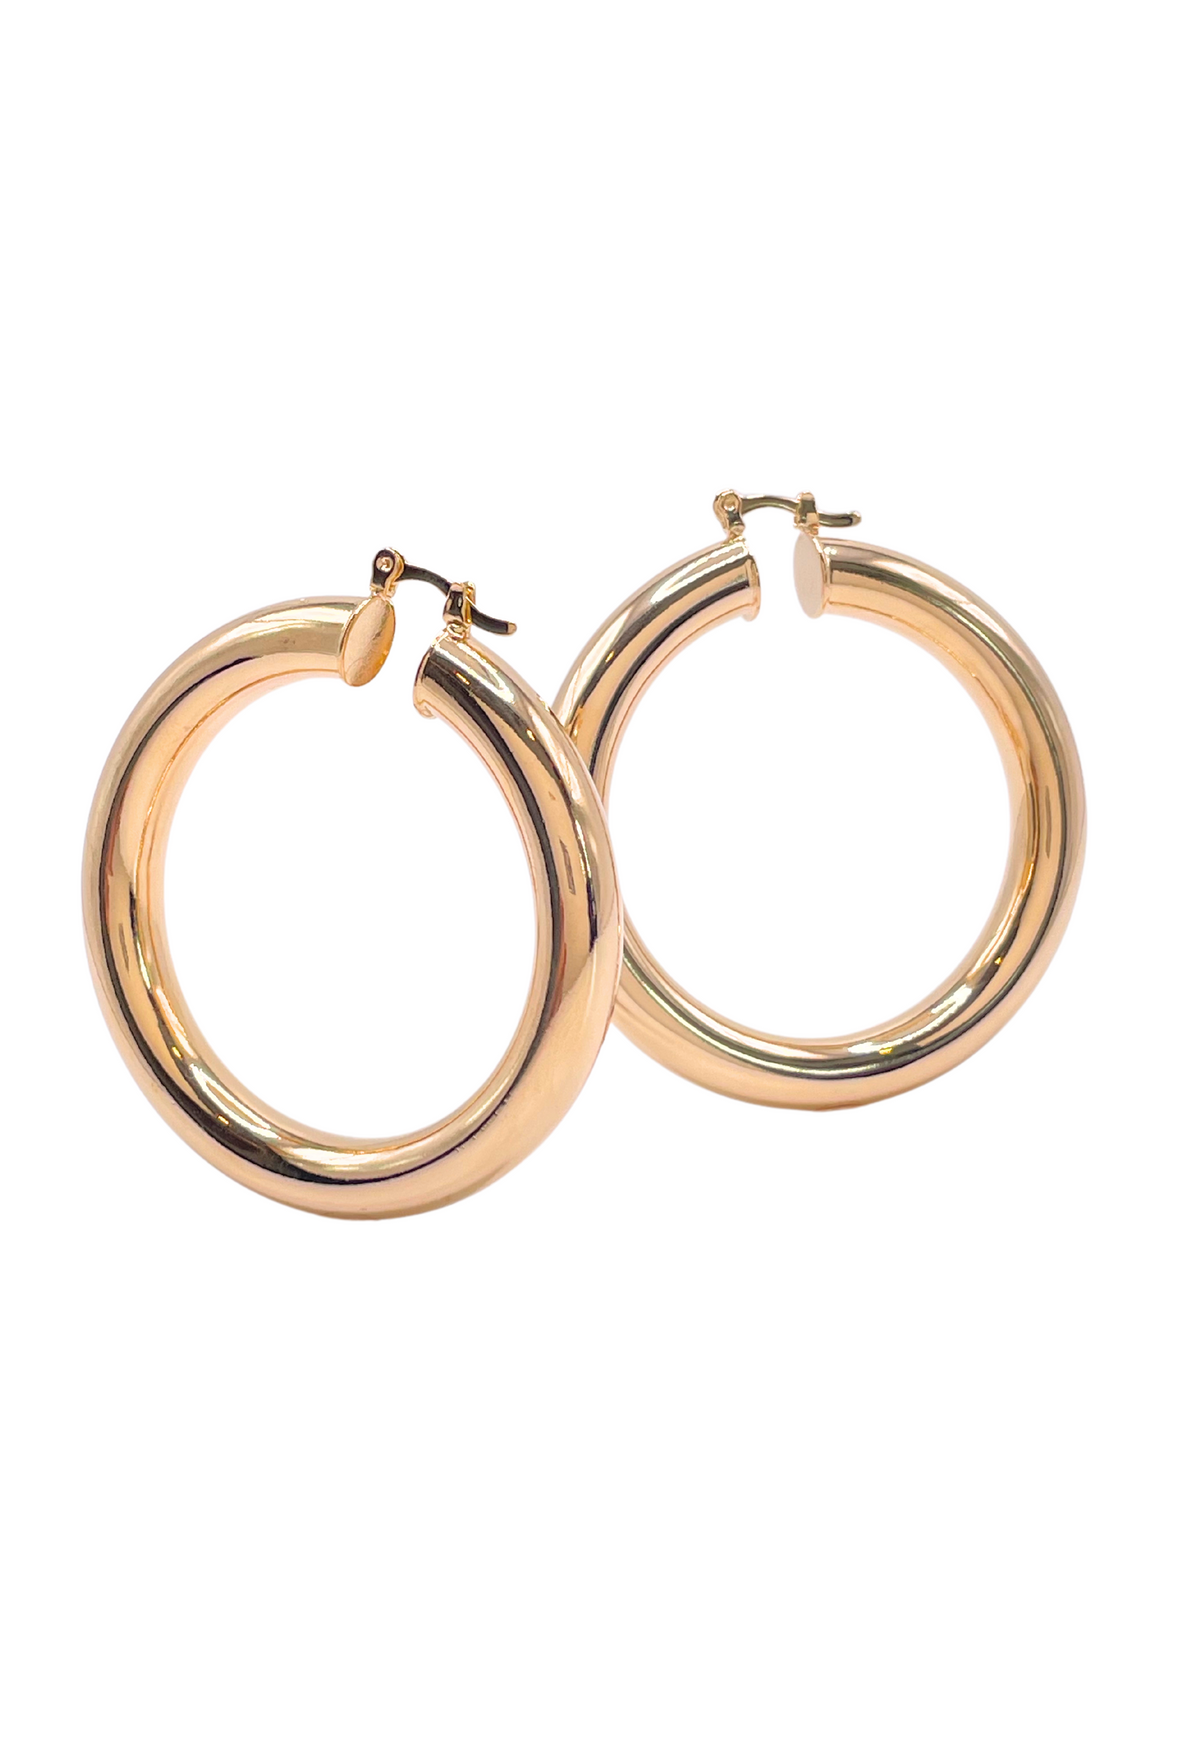 Large gold-filled tube hoops, versatile for everyday wear or layering with studs